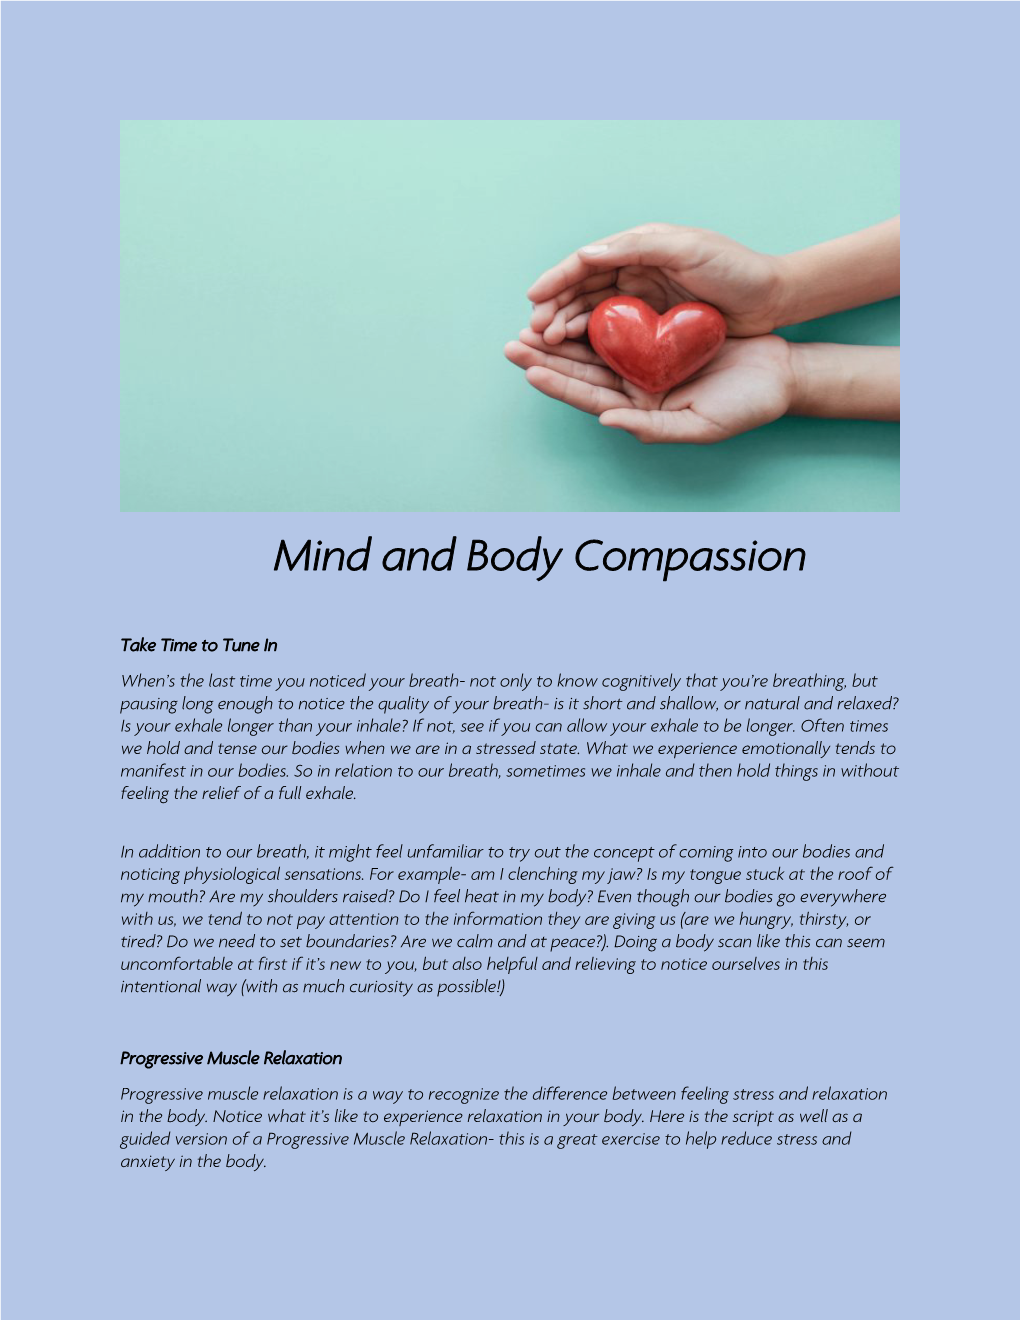 Mind and Body Compassion